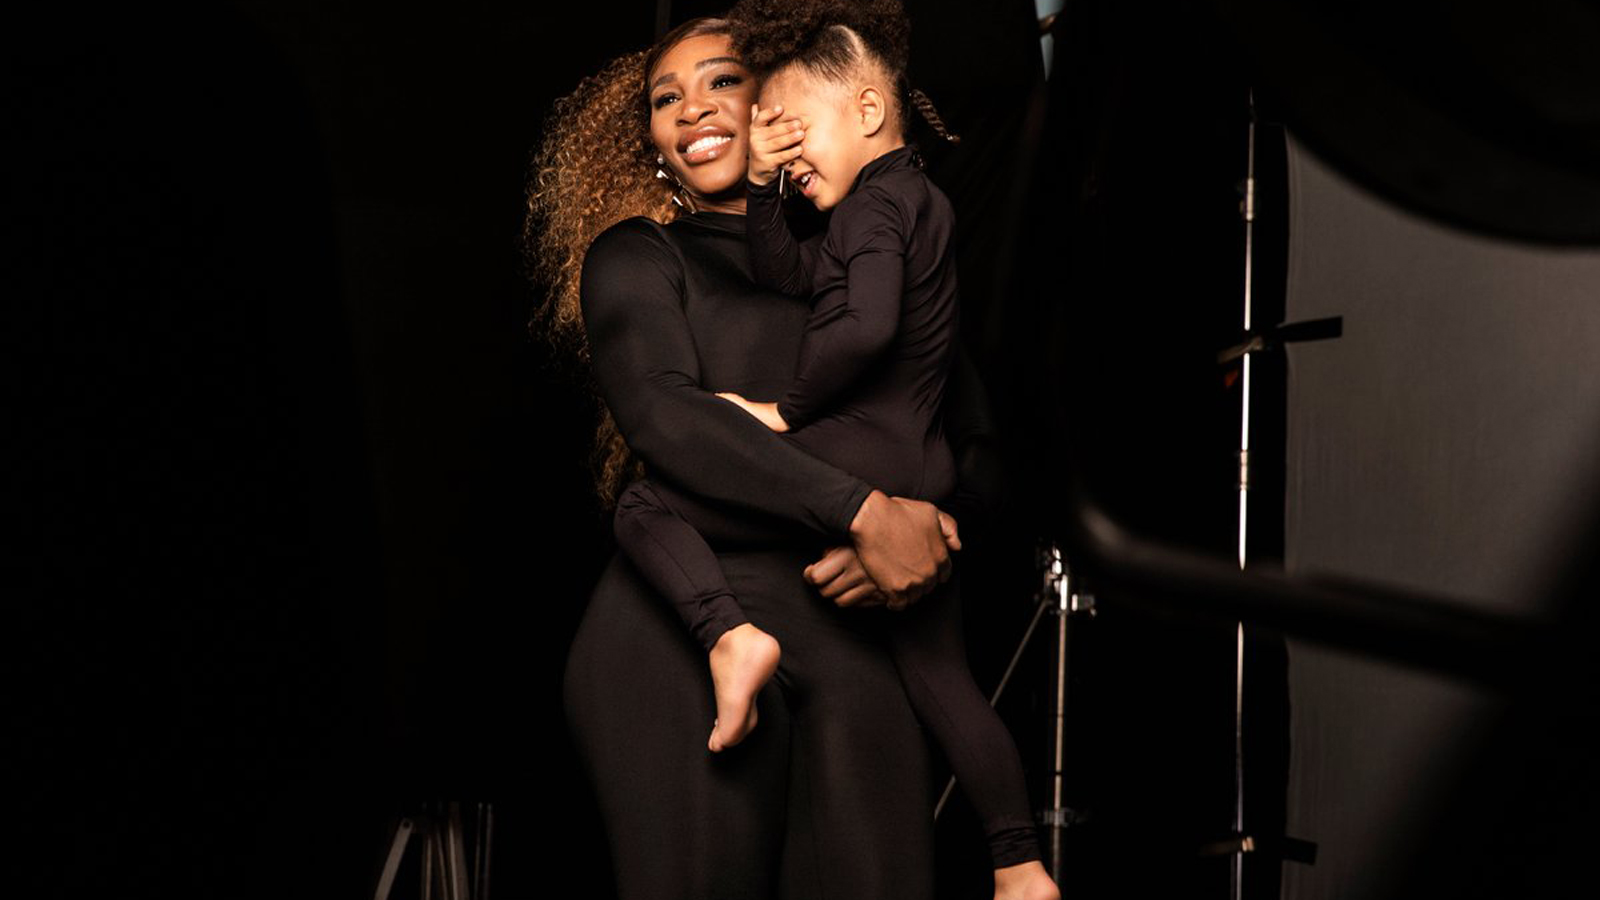 Serena Williams And Daughter Star In First Fashion Campaign